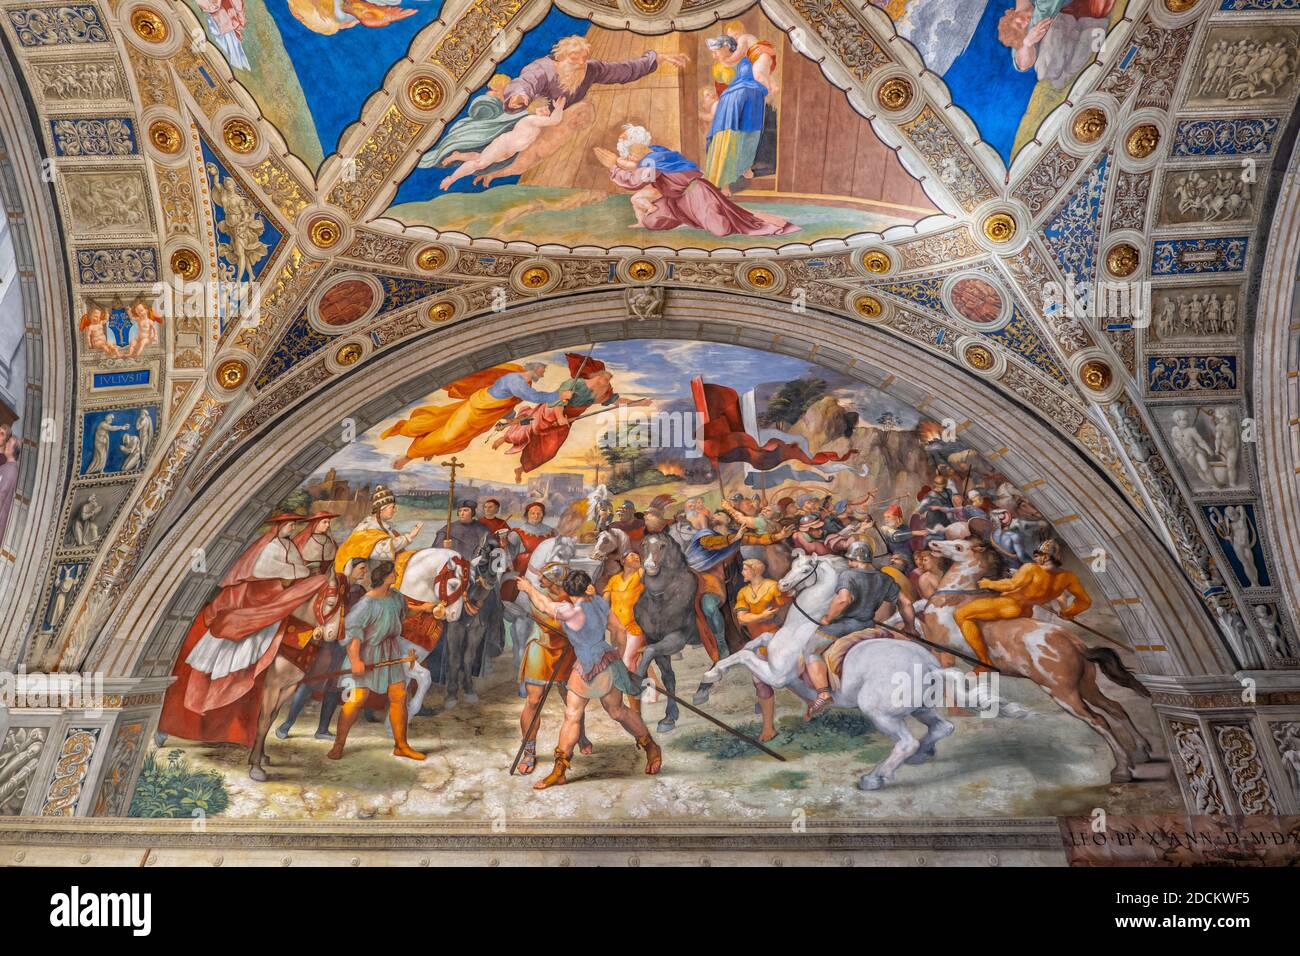 Encounter of Leo the Great with Attila fresco in Room of Heliodorus, Raphael Rooms, Vatican Museums, Rome, Italy Stock Photo